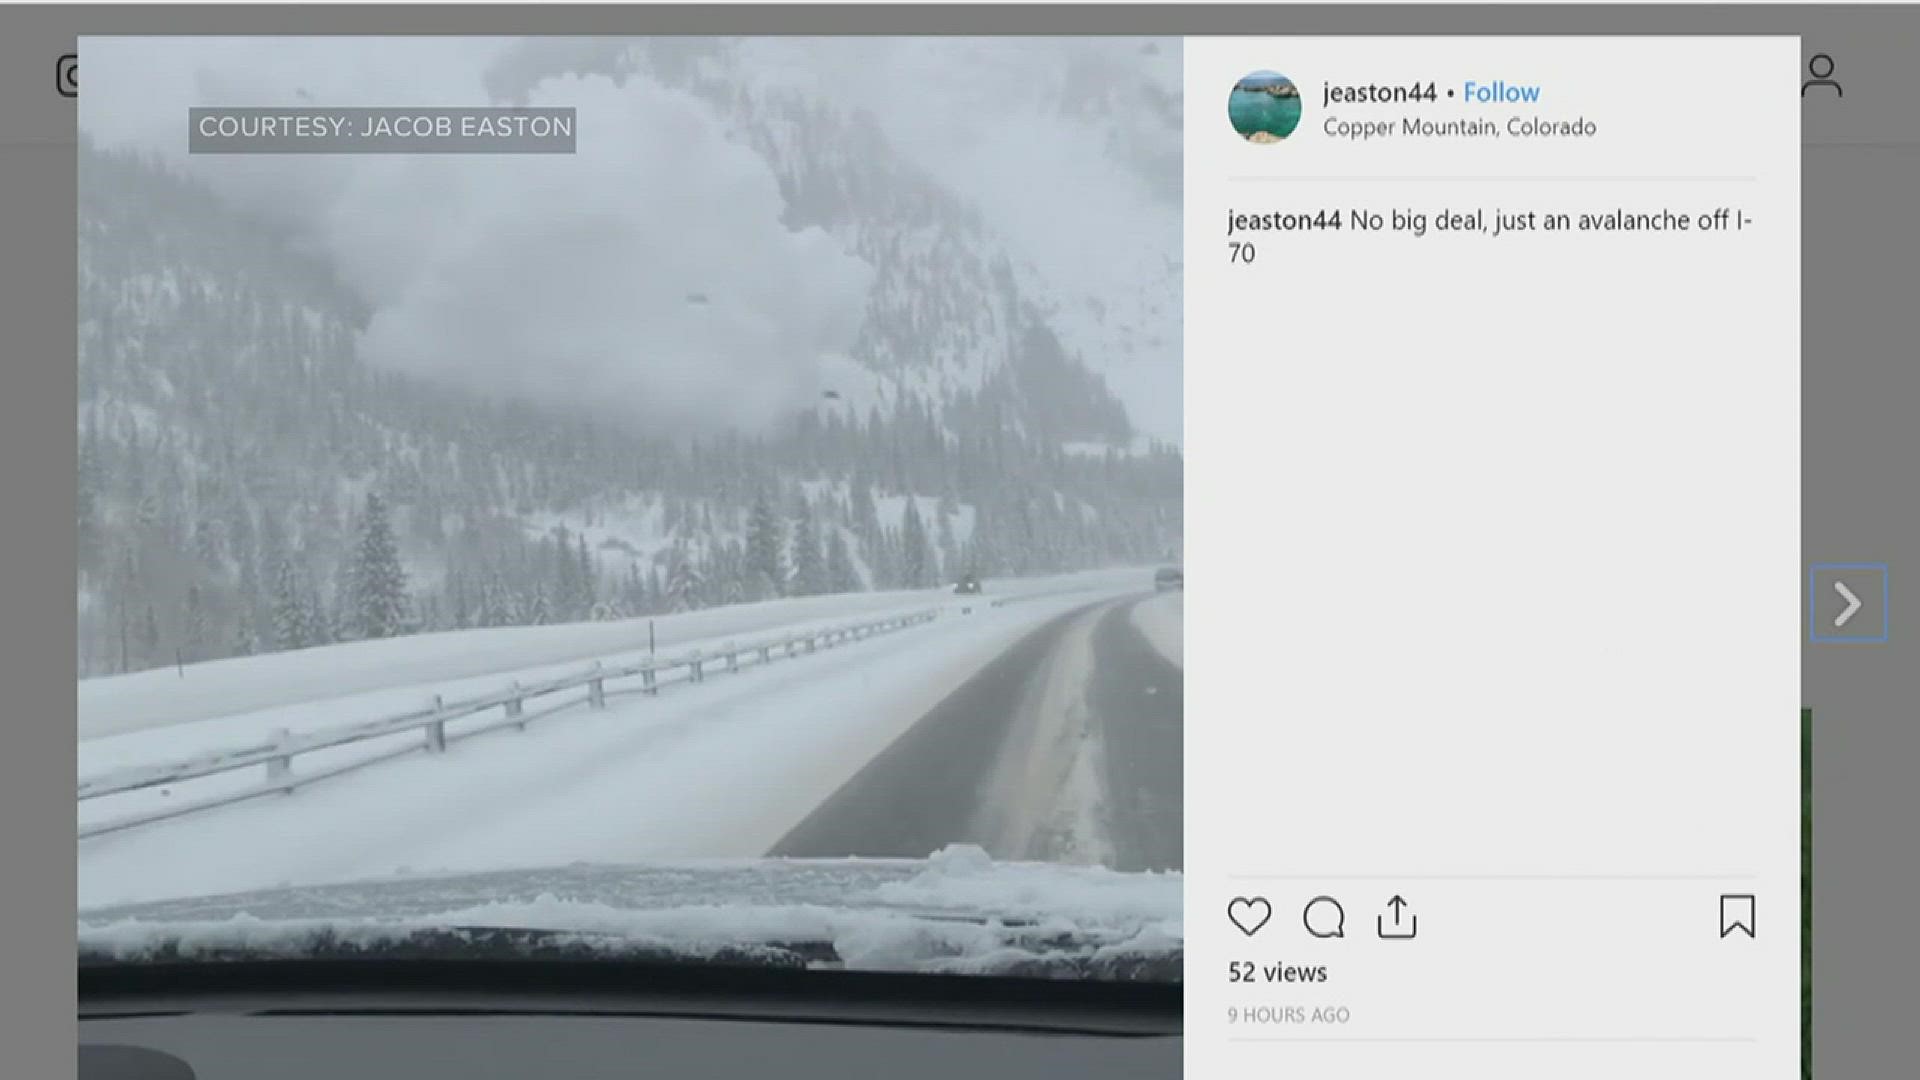 An avalanche was caught on camera barreling toward cars caught in I-70 traffic in Officer's Gulch between Silverthorne and Copper Mountain. According to the person who took the video, most of the snow did not make it to the road and no one was injured.